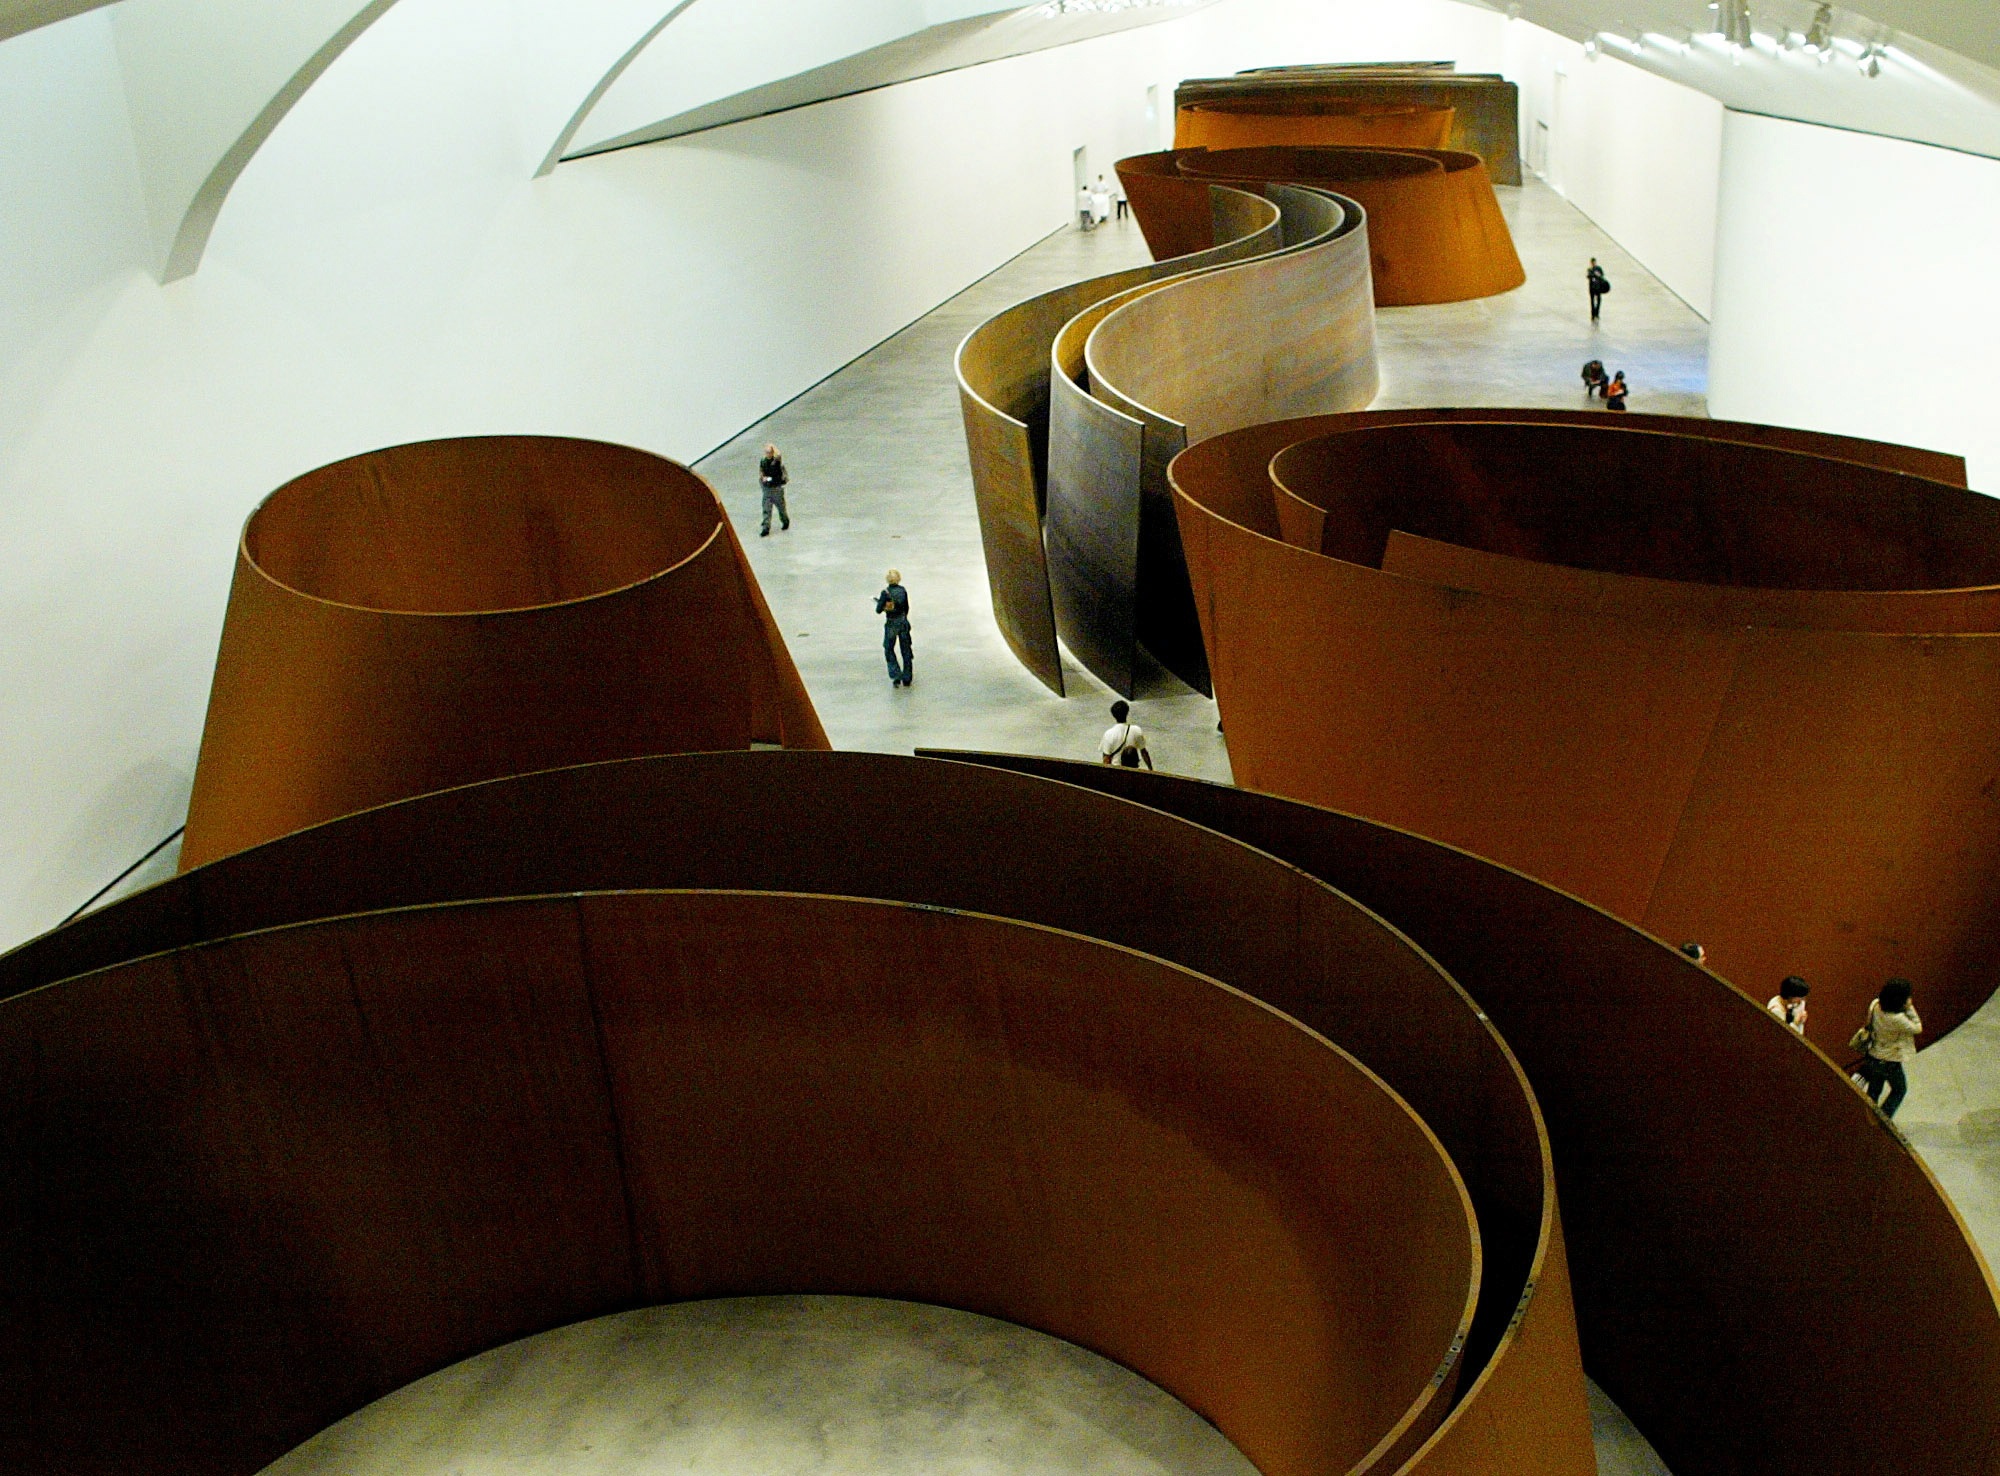 Visitors Observe Eight Massive Steel Sculptures By U.s. Artist Richard Serra During A Special Previe..